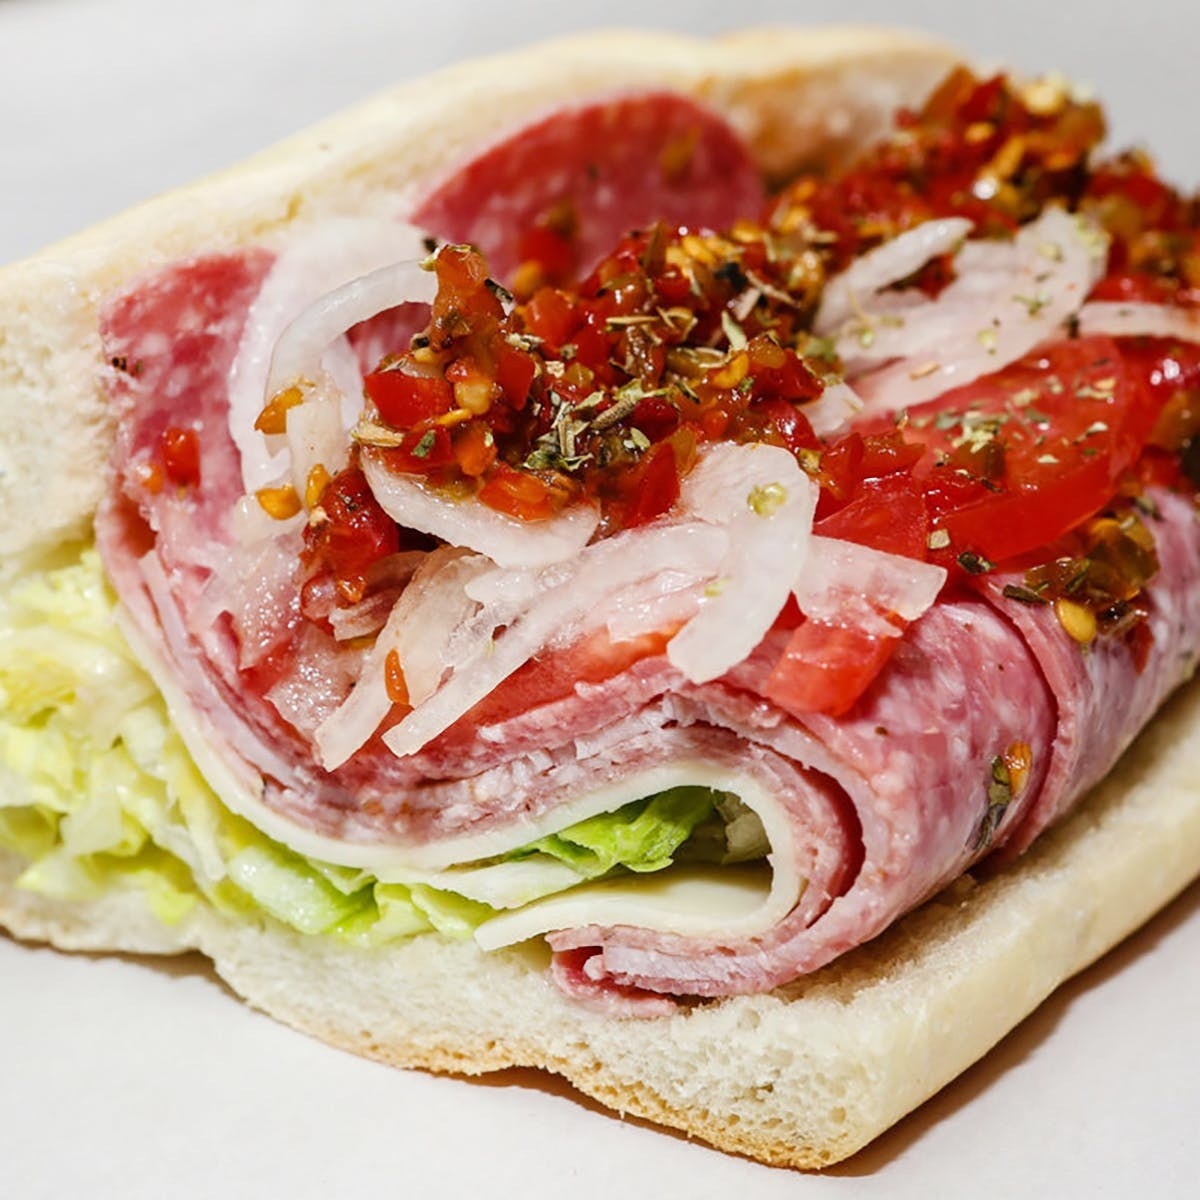 A White House special sub with lots of deli meat, provolone, onions, lettuce, and hot pepper.